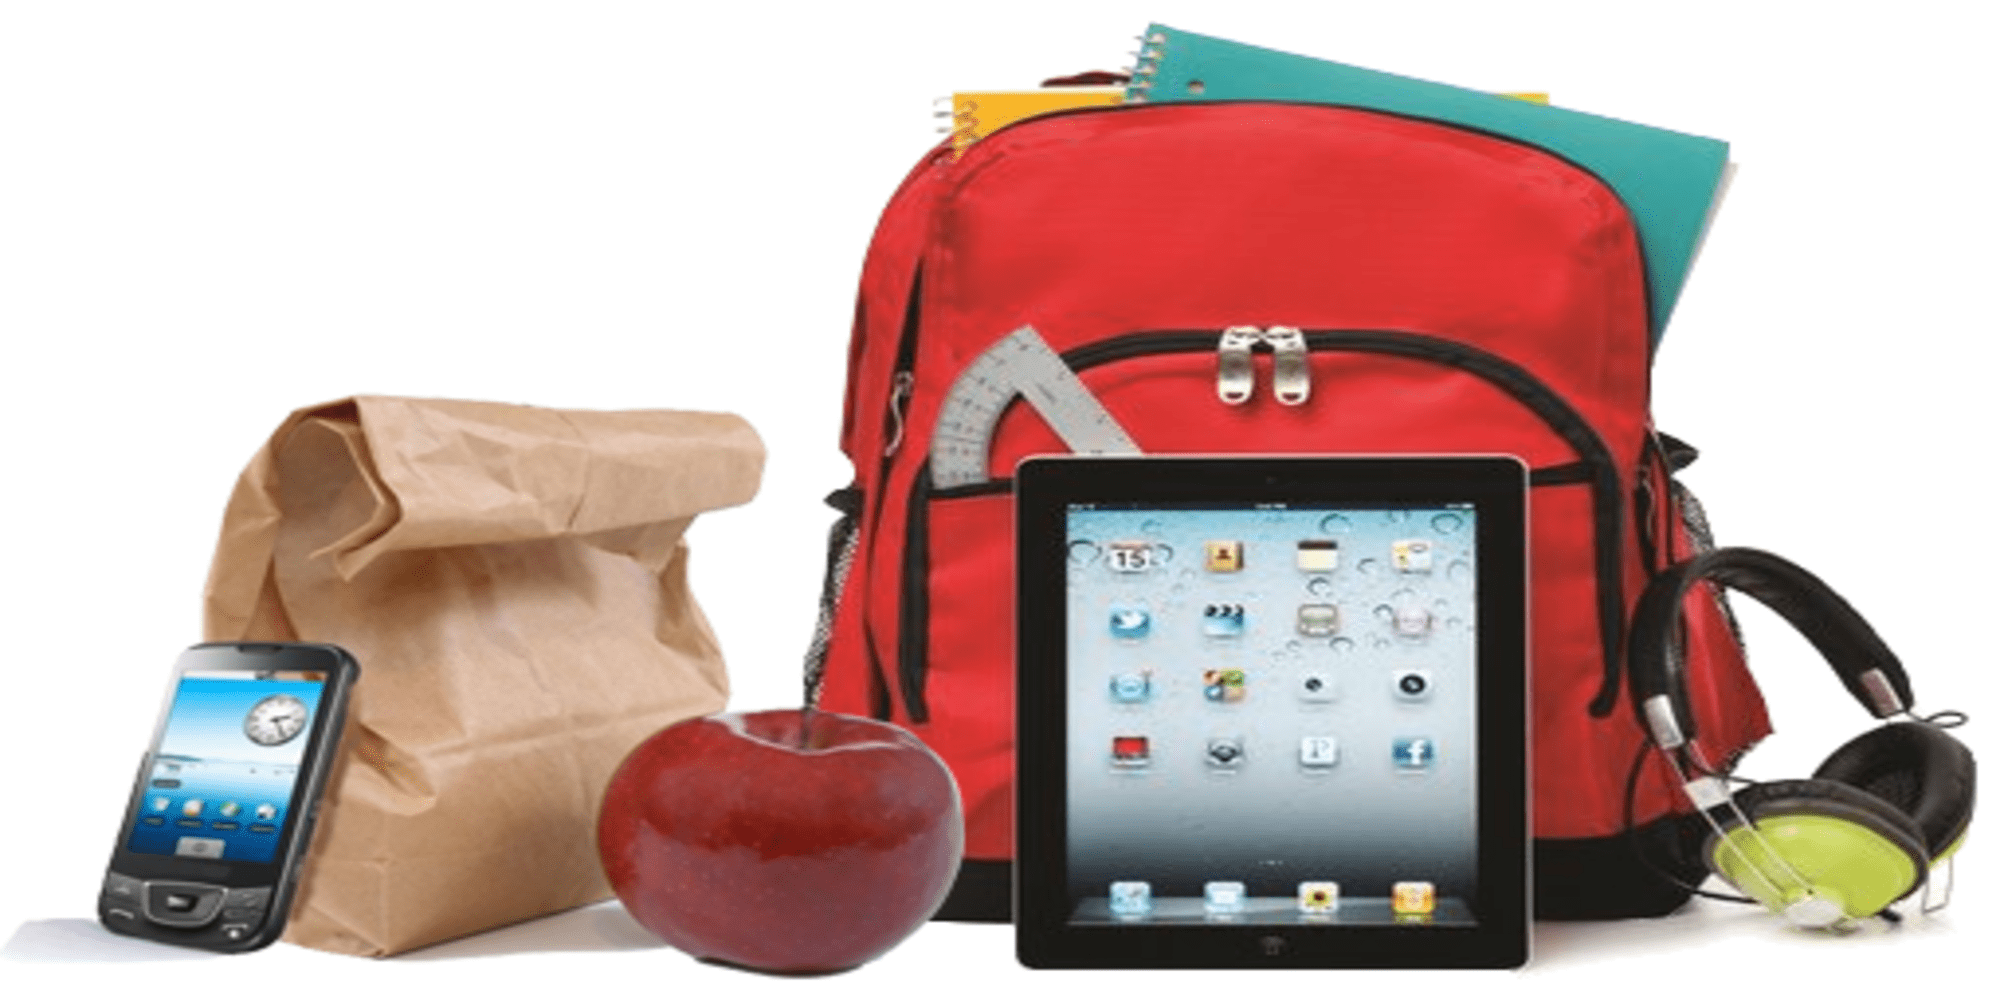 5 BYOD Policy Questions and Answers for School Wireless Networks